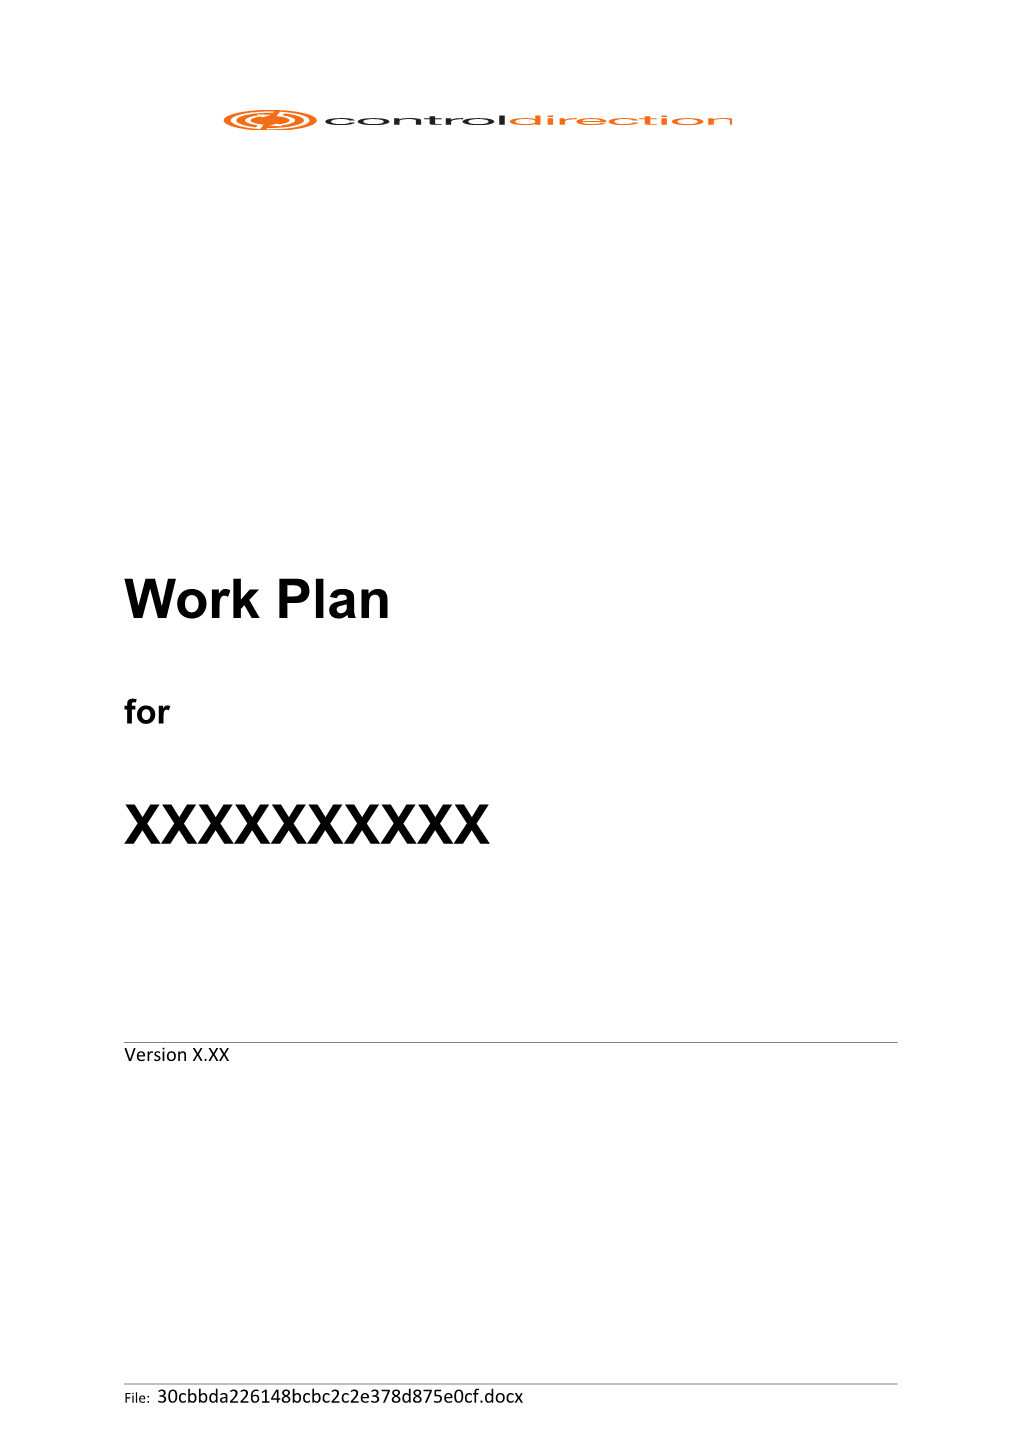 Project Work Plan Template